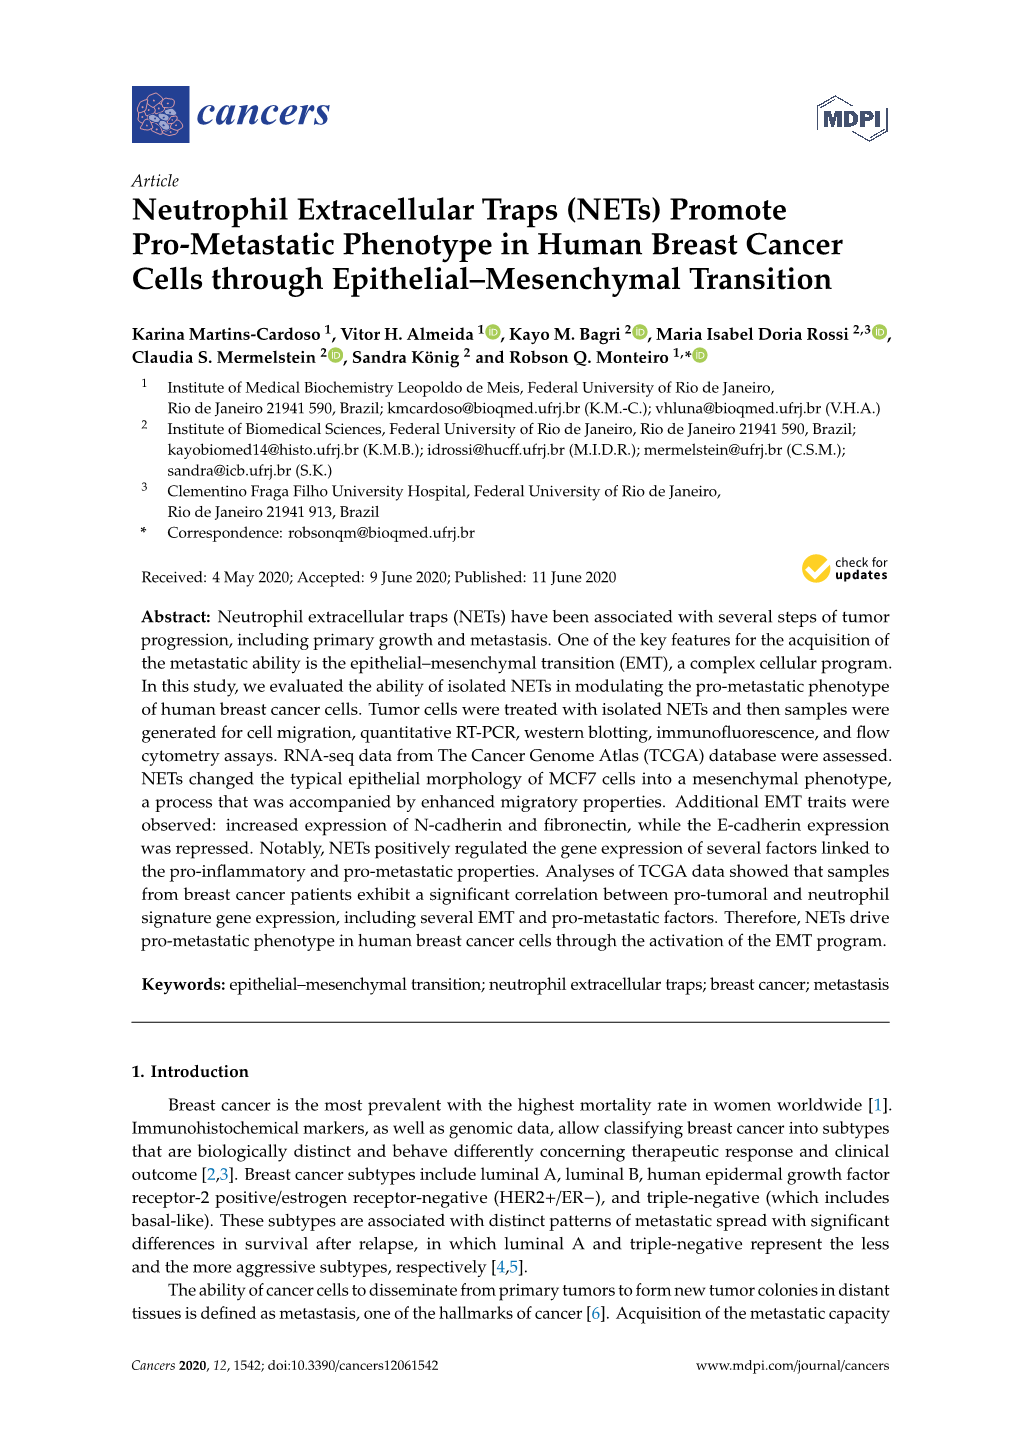 Neutrophil Extracellular Traps (Nets) Promote Pro-Metastatic Phenotype in Human Breast Cancer Cells Through Epithelial–Mesenchymal Transition